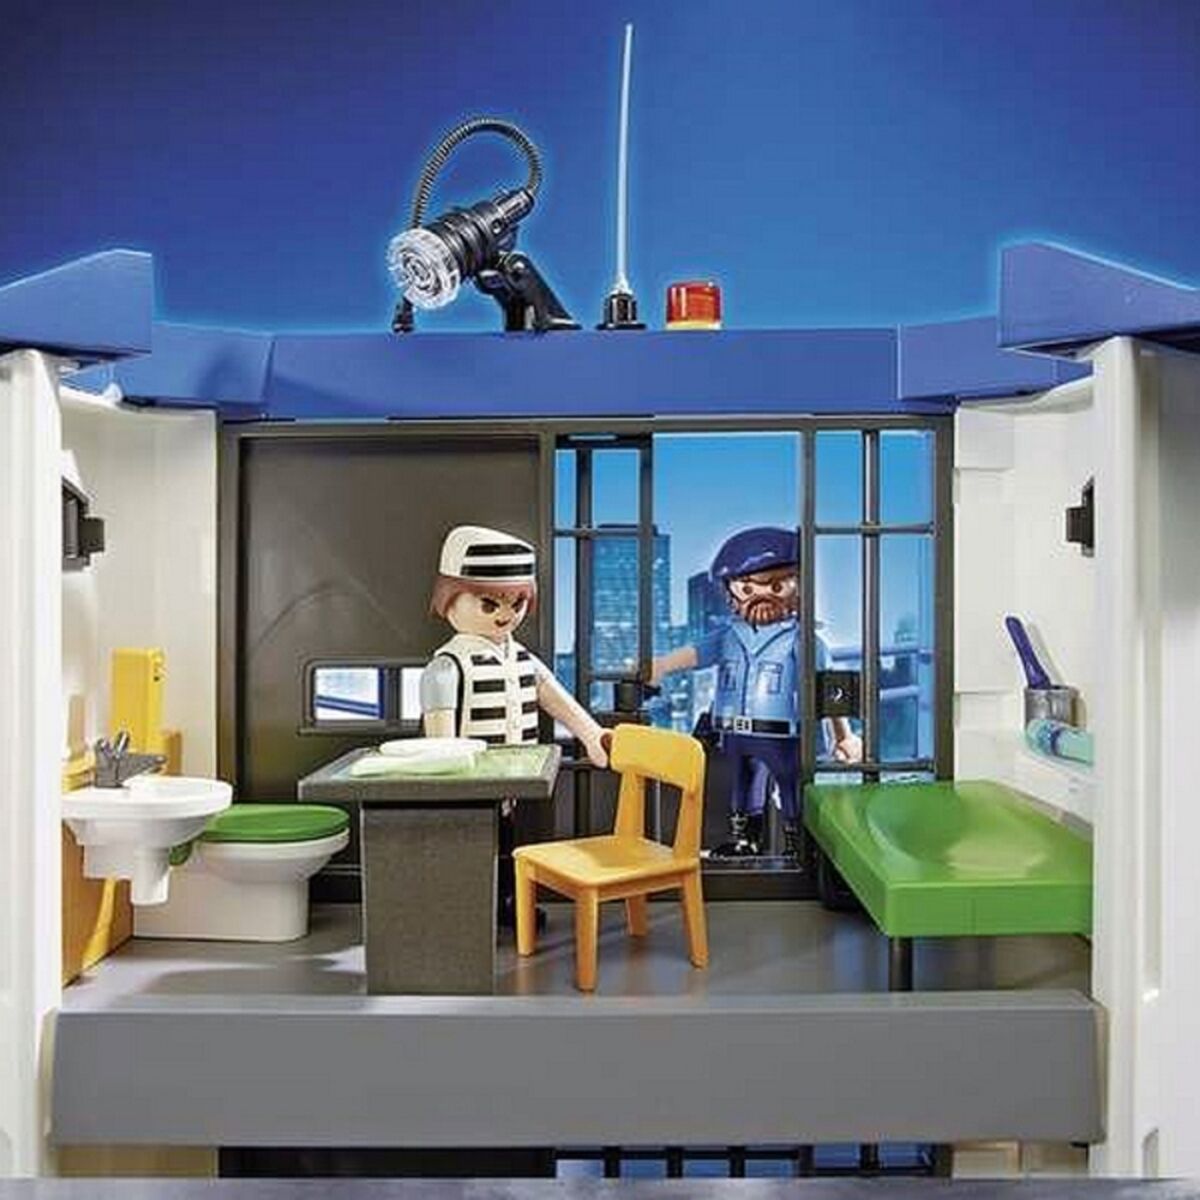 Playmobil City Action Police Station with Prison Playmobil 6919